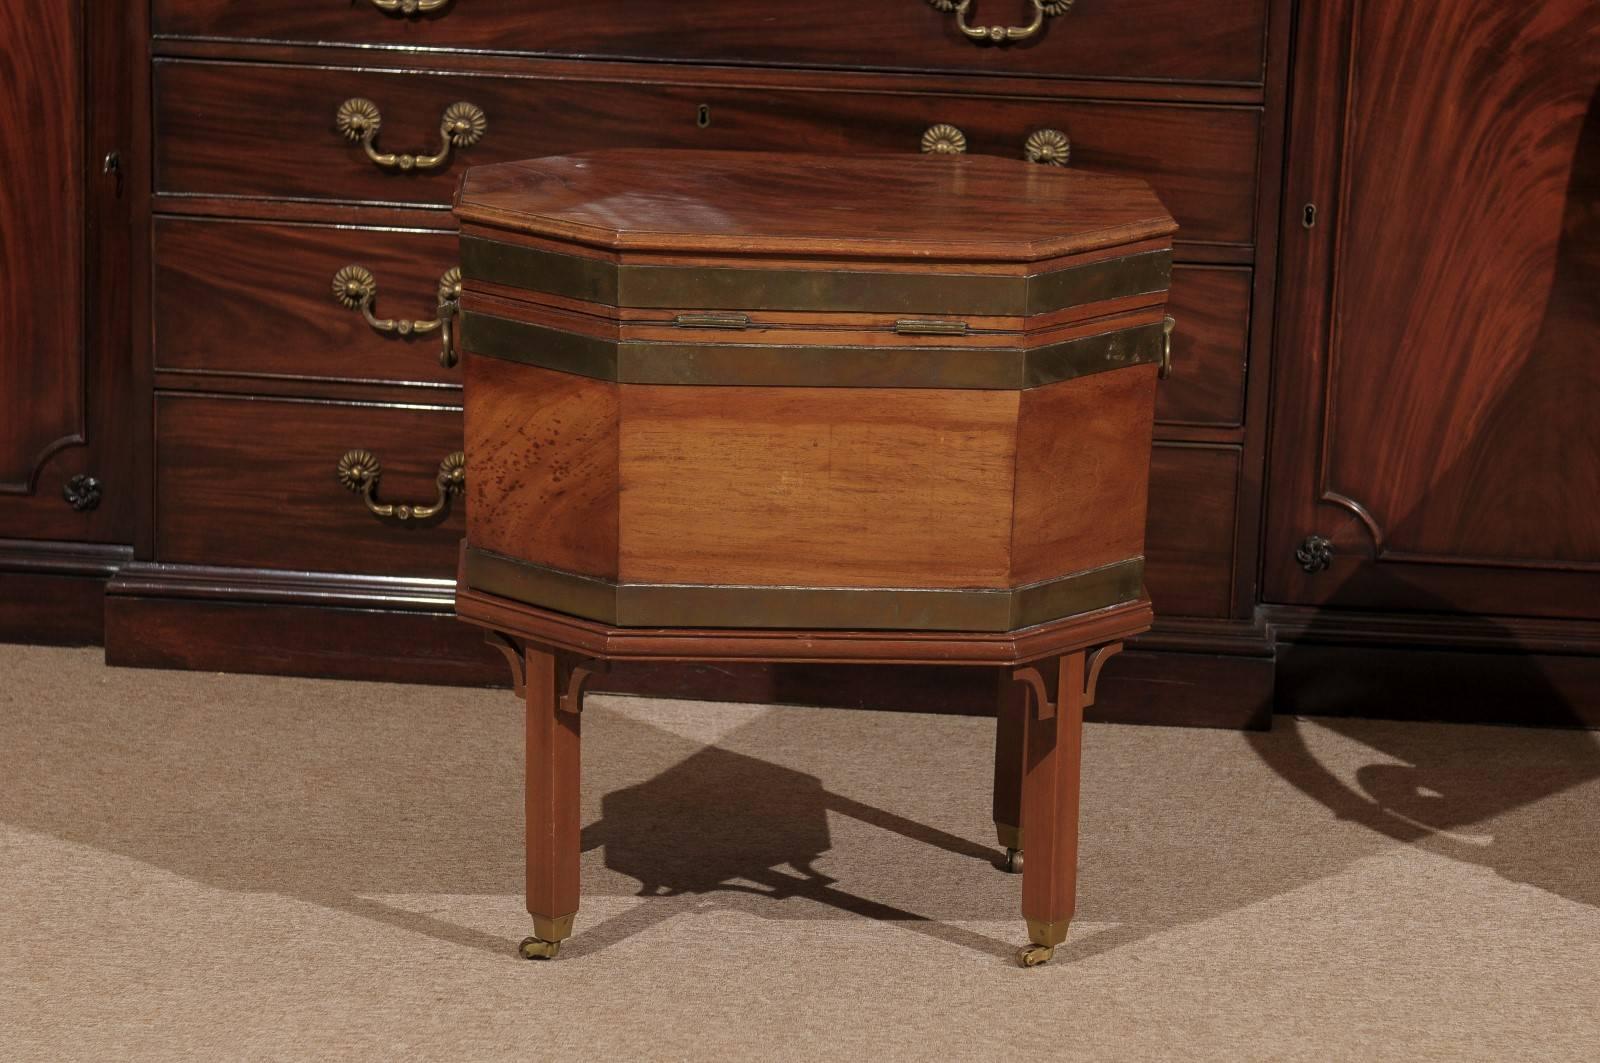 Octagonal shaped Cellarette in mahogany with brass banding and handles mounted atop a later stand with bracket corner molding and castors, England, Early 19th century.